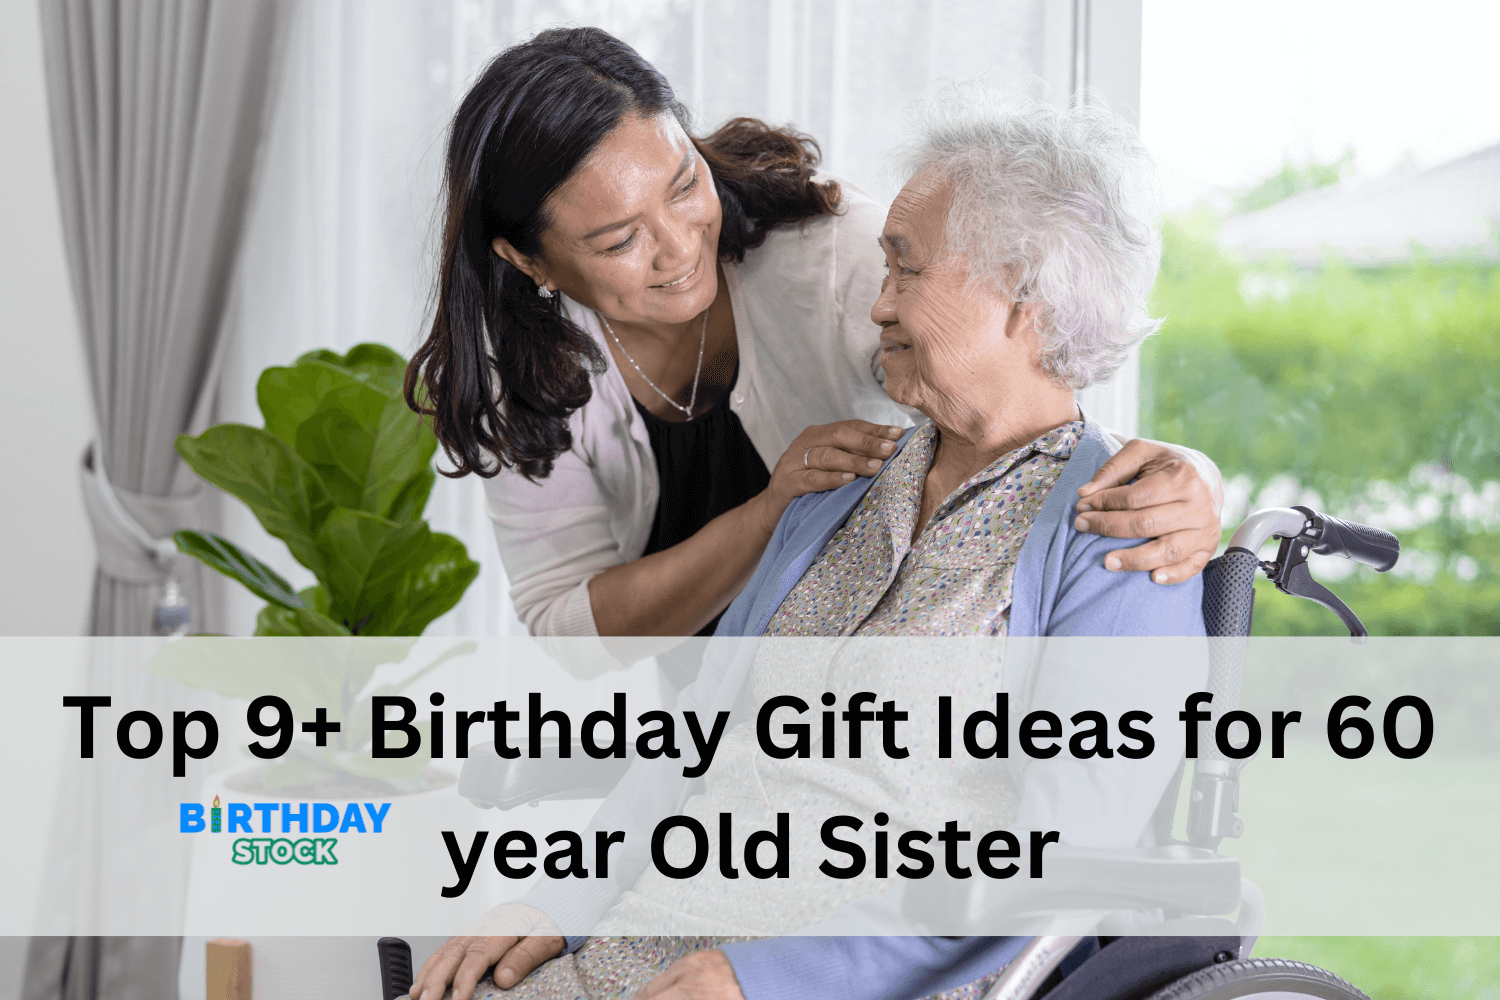 Top 9+ Birthday Gift Ideas for 60 year Old Sister